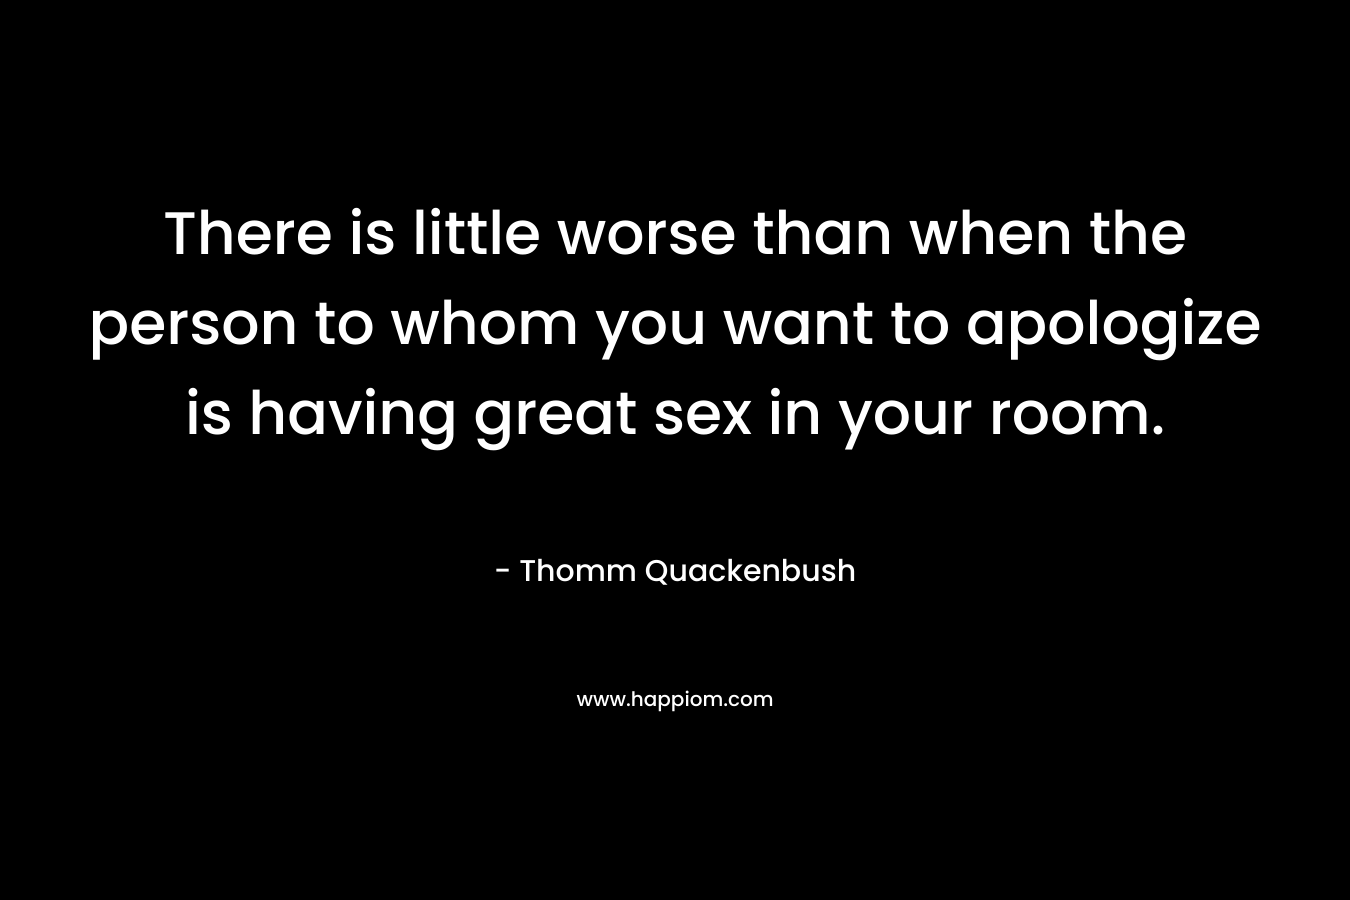 There is little worse than when the person to whom you want to apologize is having great sex in your room.